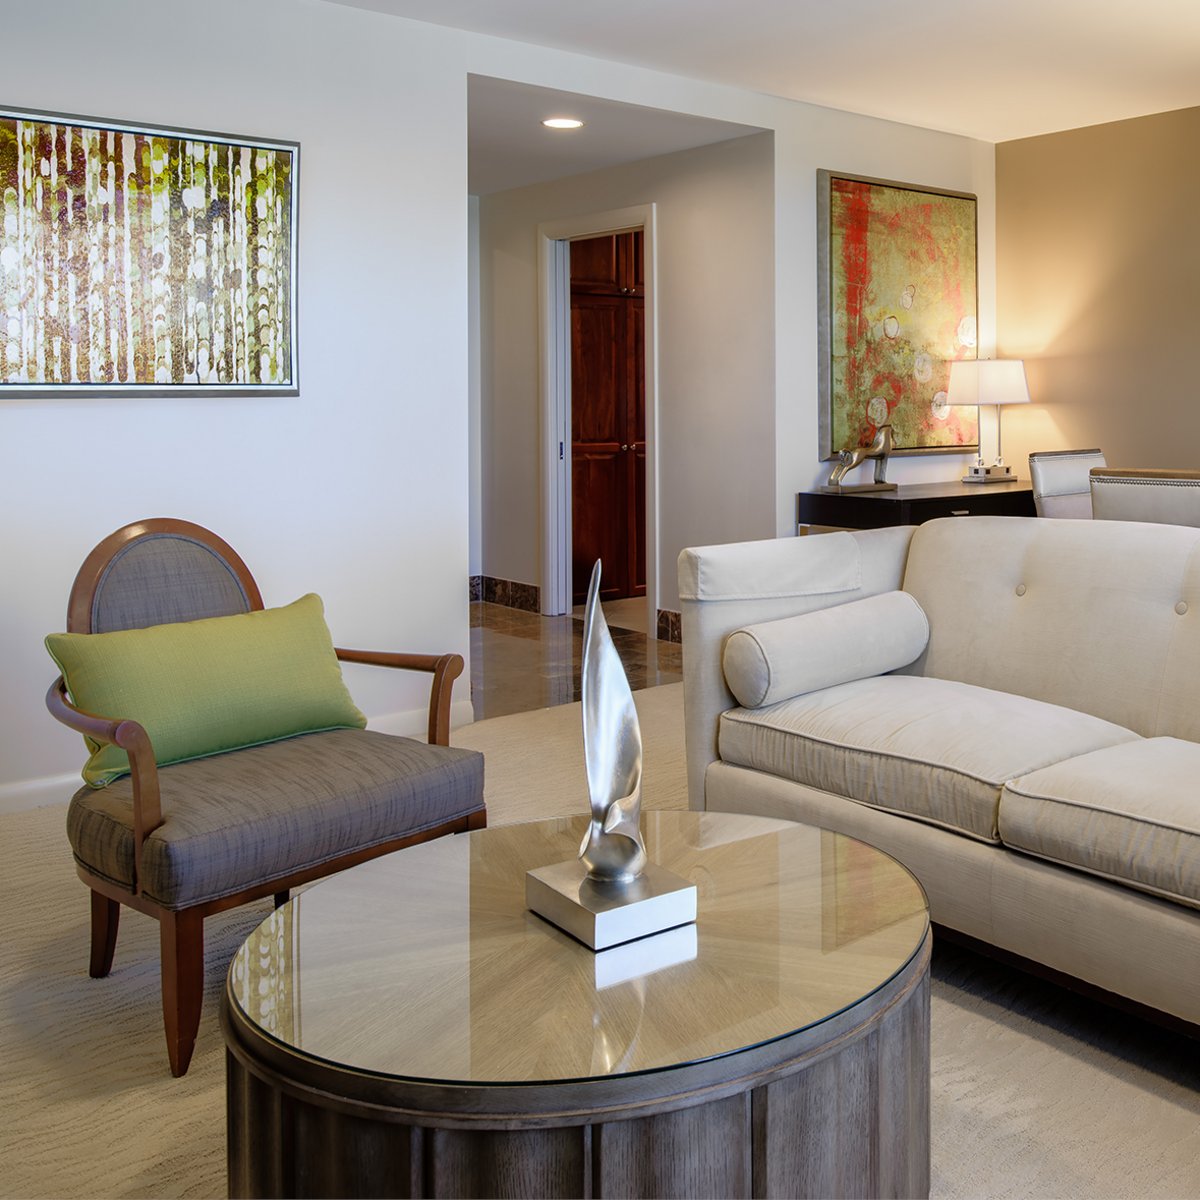 Our #ExecutiveCollection suites offer plenty of space to relax after a long day, with comfortable, elegant furniture and a welcoming atmosphere. It is perfect for #extendedstays, with separate living, sleeping, and dining areas. Learn more here: bit.ly/2RKvGfi #Rochester